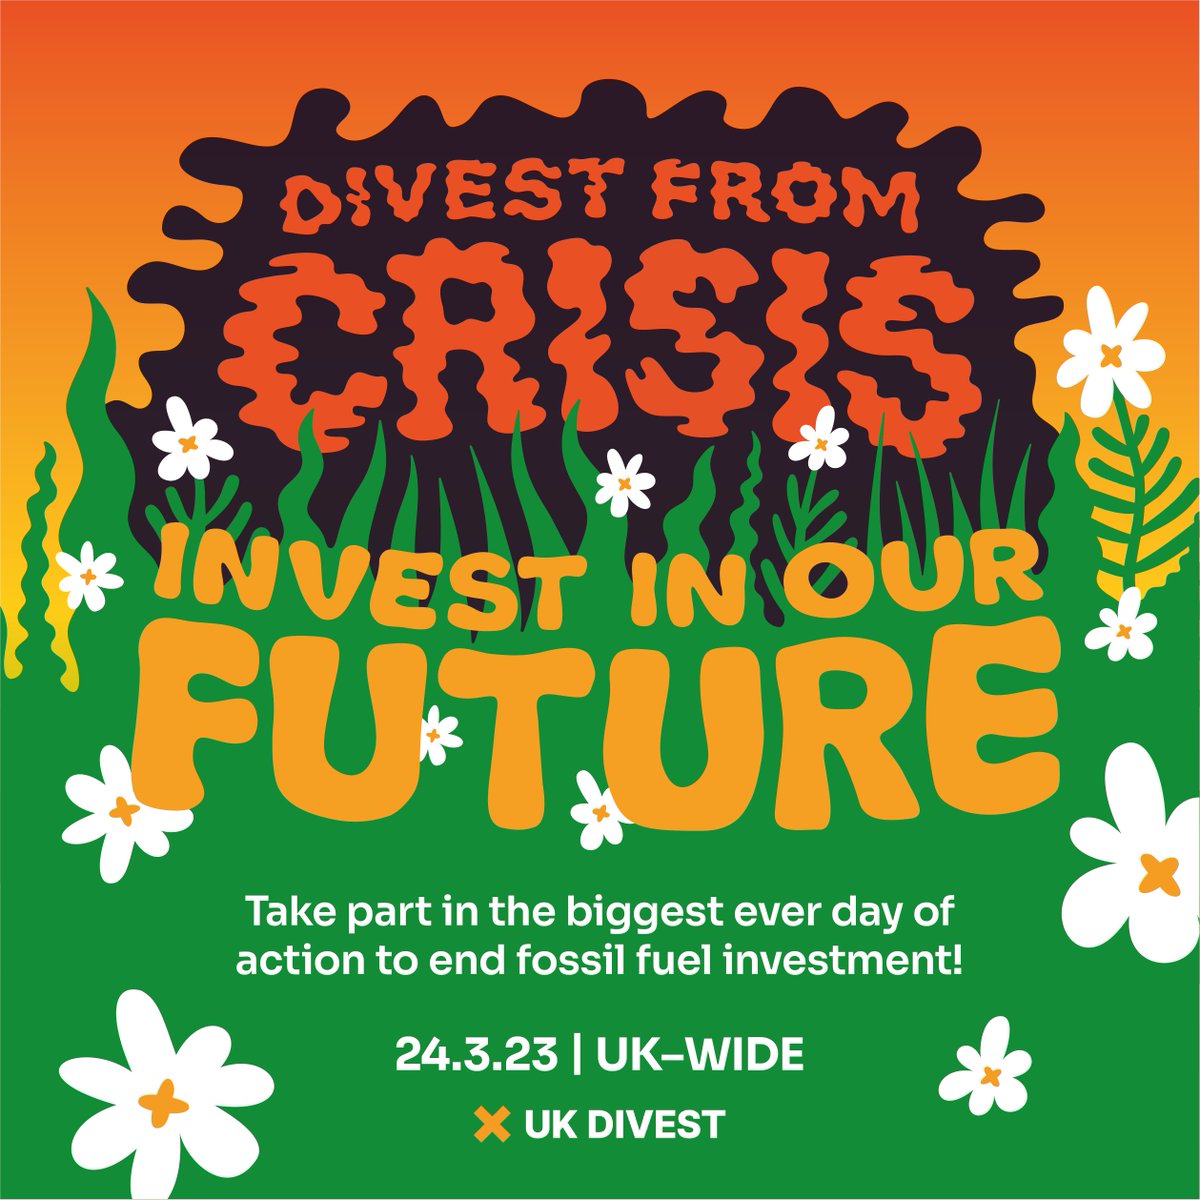 With fuel poverty, energy prices & global temperatures on the rise, it’s time local authorities stopped investing workers’ pensions in the culprits responsible. Write to your councillors now & urge them to support fossil free pensions ➡️ divest.org.uk/act-now @UKDivest